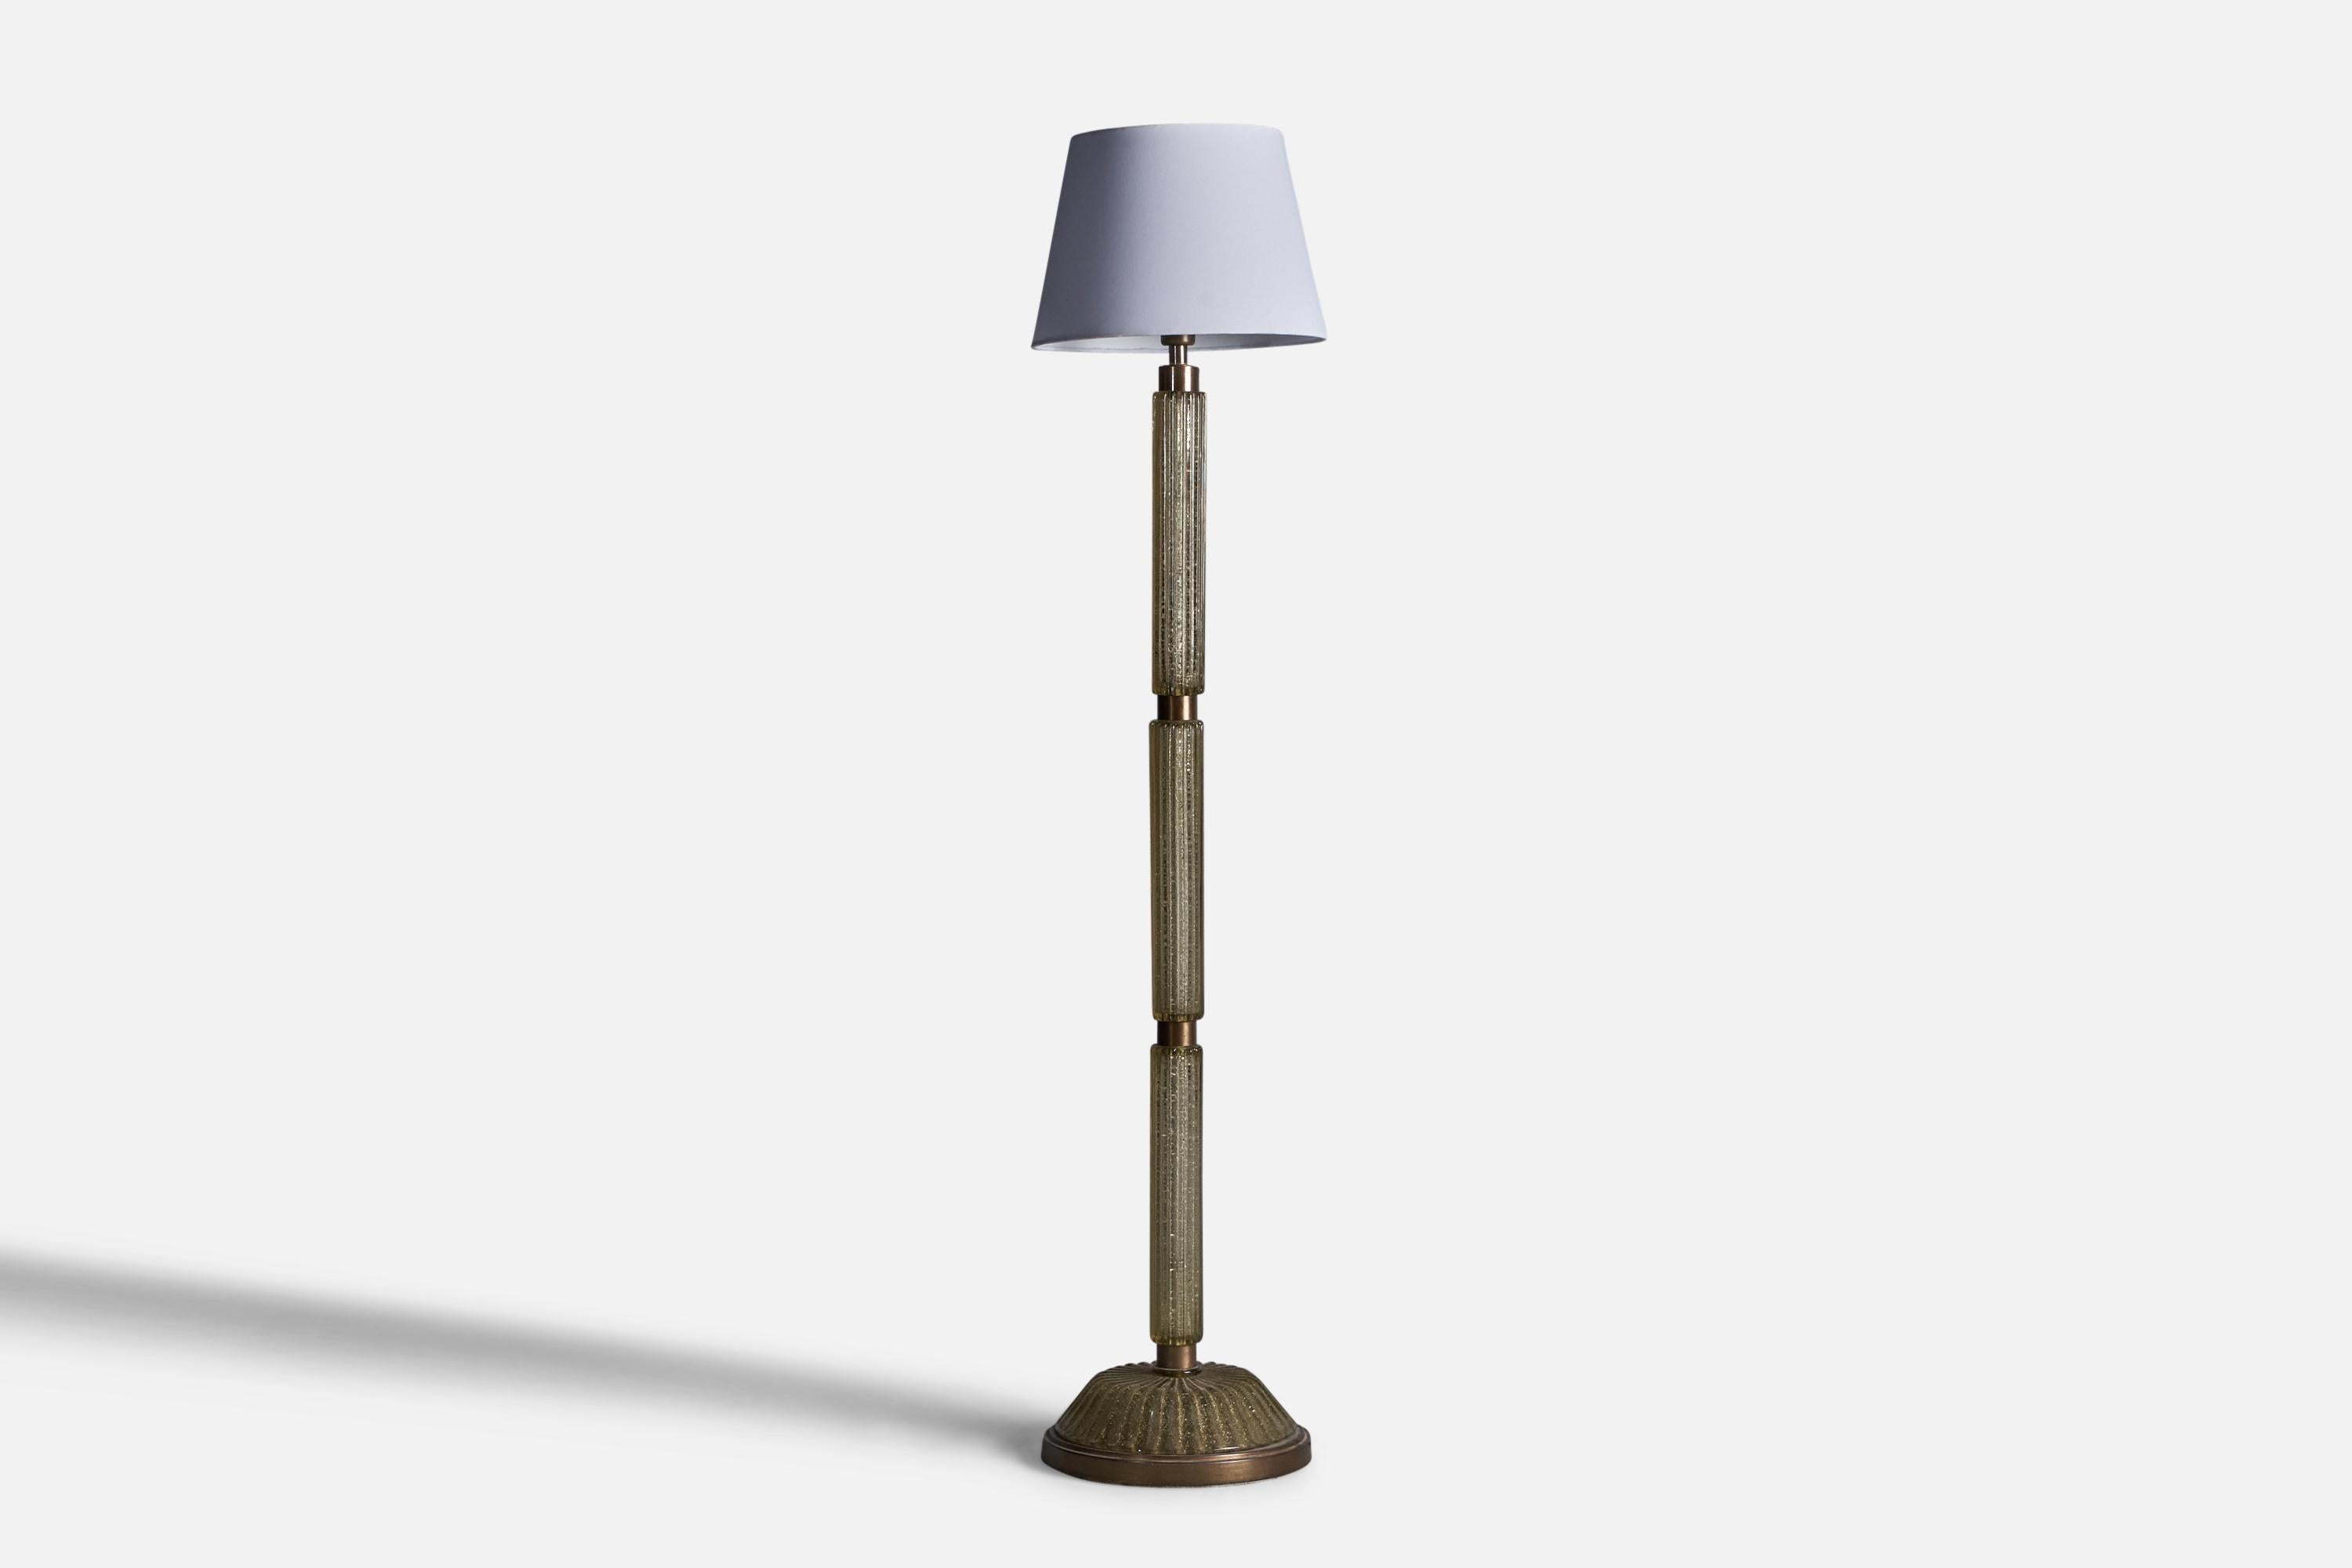 A brass, Murano glass and white fabric floor lamp, designed and produced in Italy, c. 1930s.

Overall Dimensions: 64.25